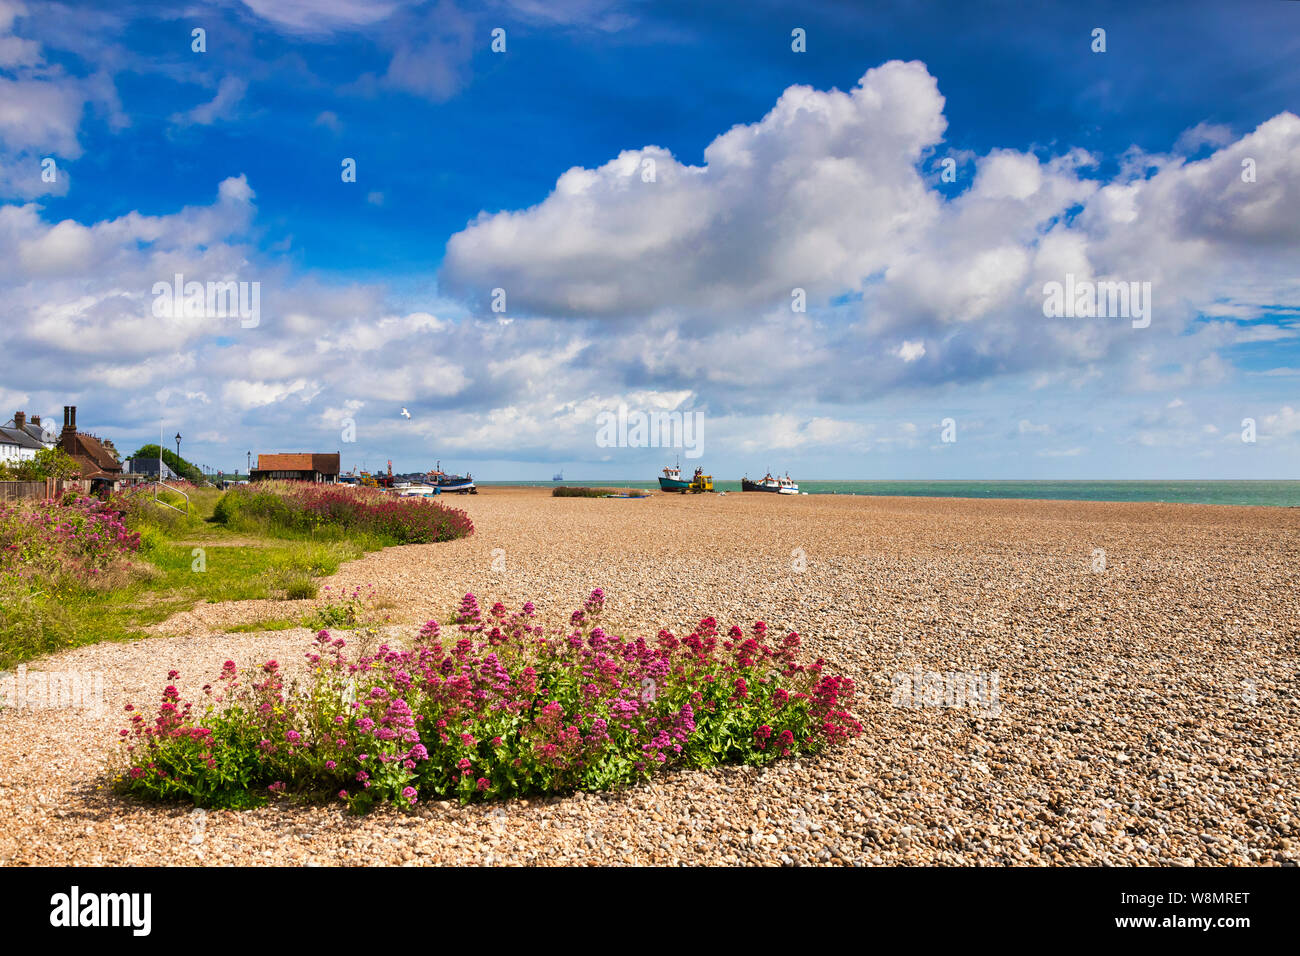 16 June 2019: Aldeburgh, Suffolk, UK - The beach, covered in shingle, and wildflowers, on a beautiful summer day, blue sky and white clouds. Stock Photo